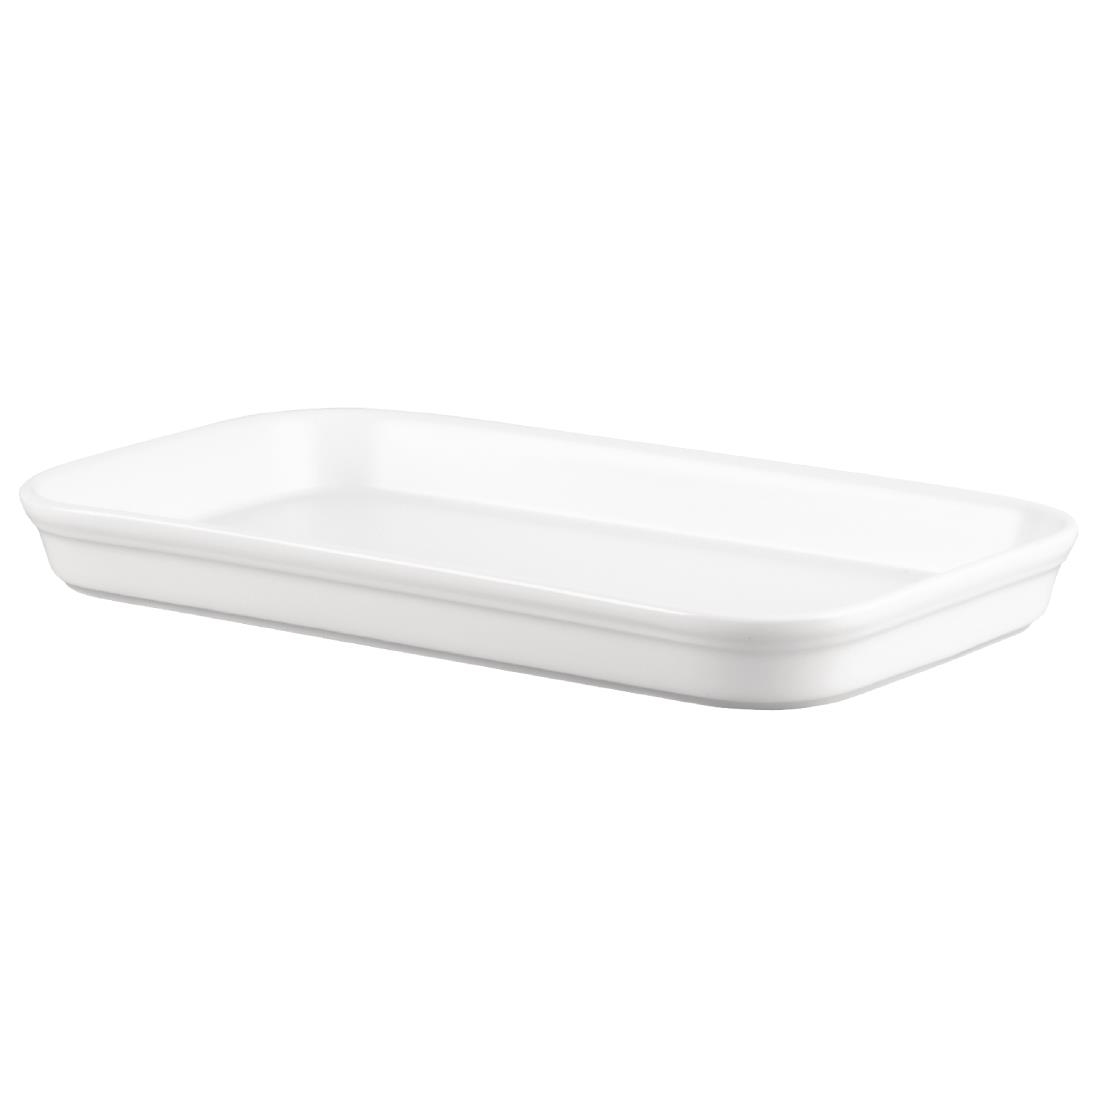 Churchill Counterserve Flat Trays 160x 250mm (Pack of 6)